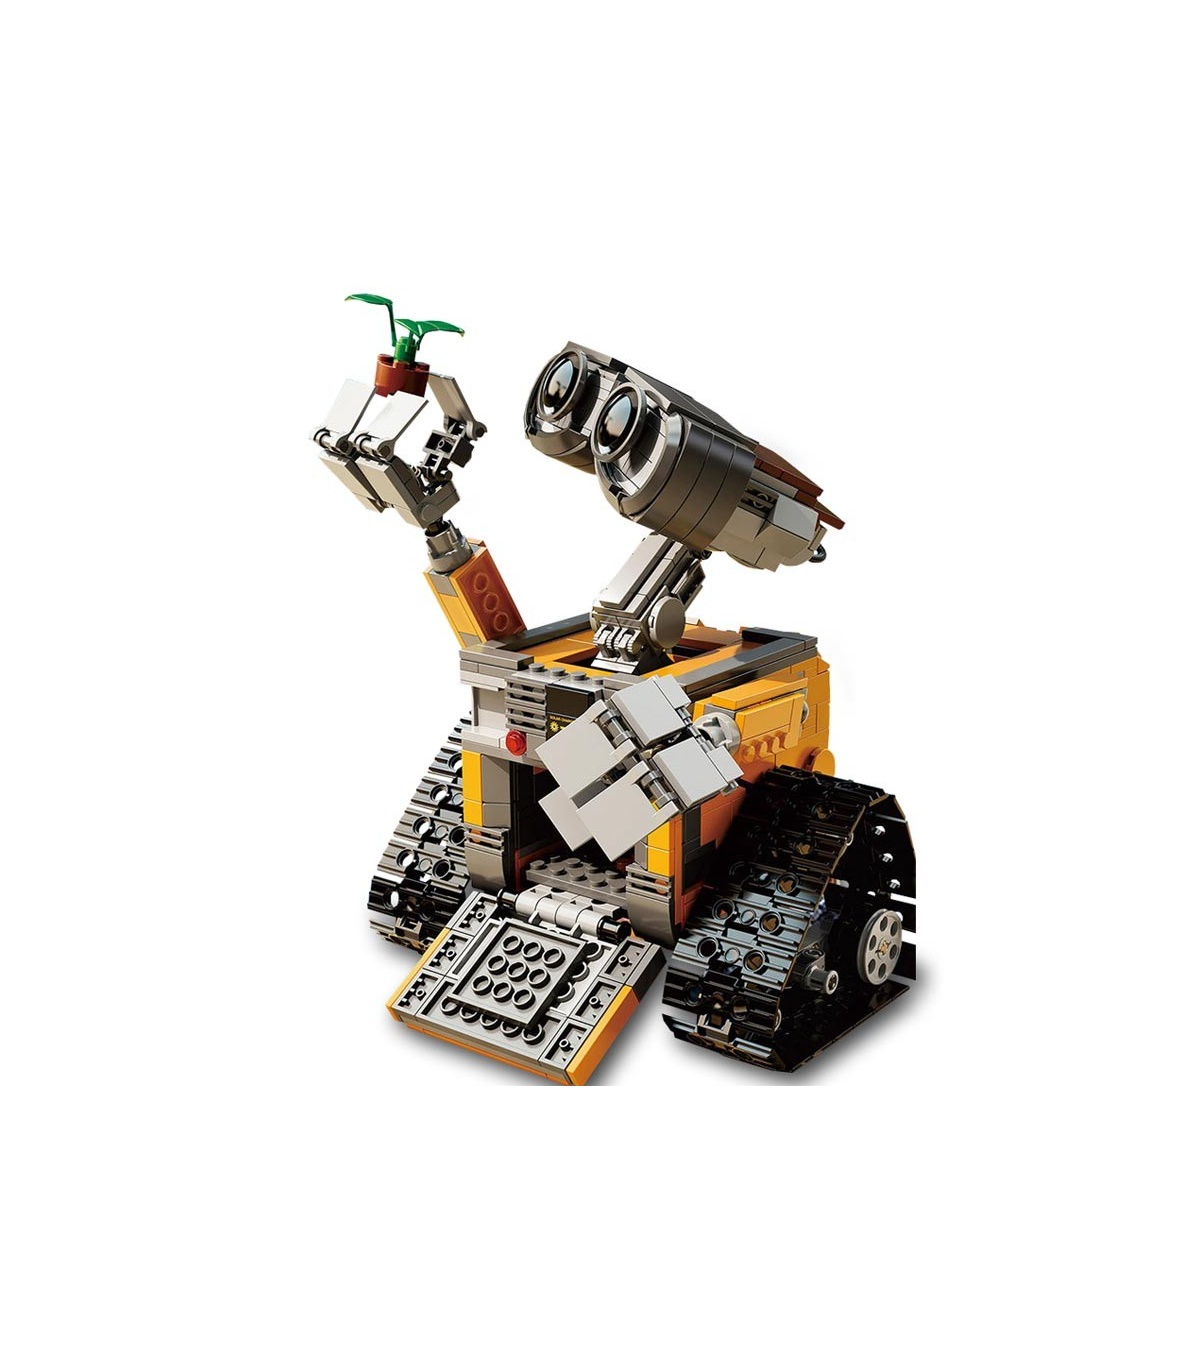 Details about   Wall E Robot New Lego Building Block Gift Games Figure Action Pixar Toy Model 